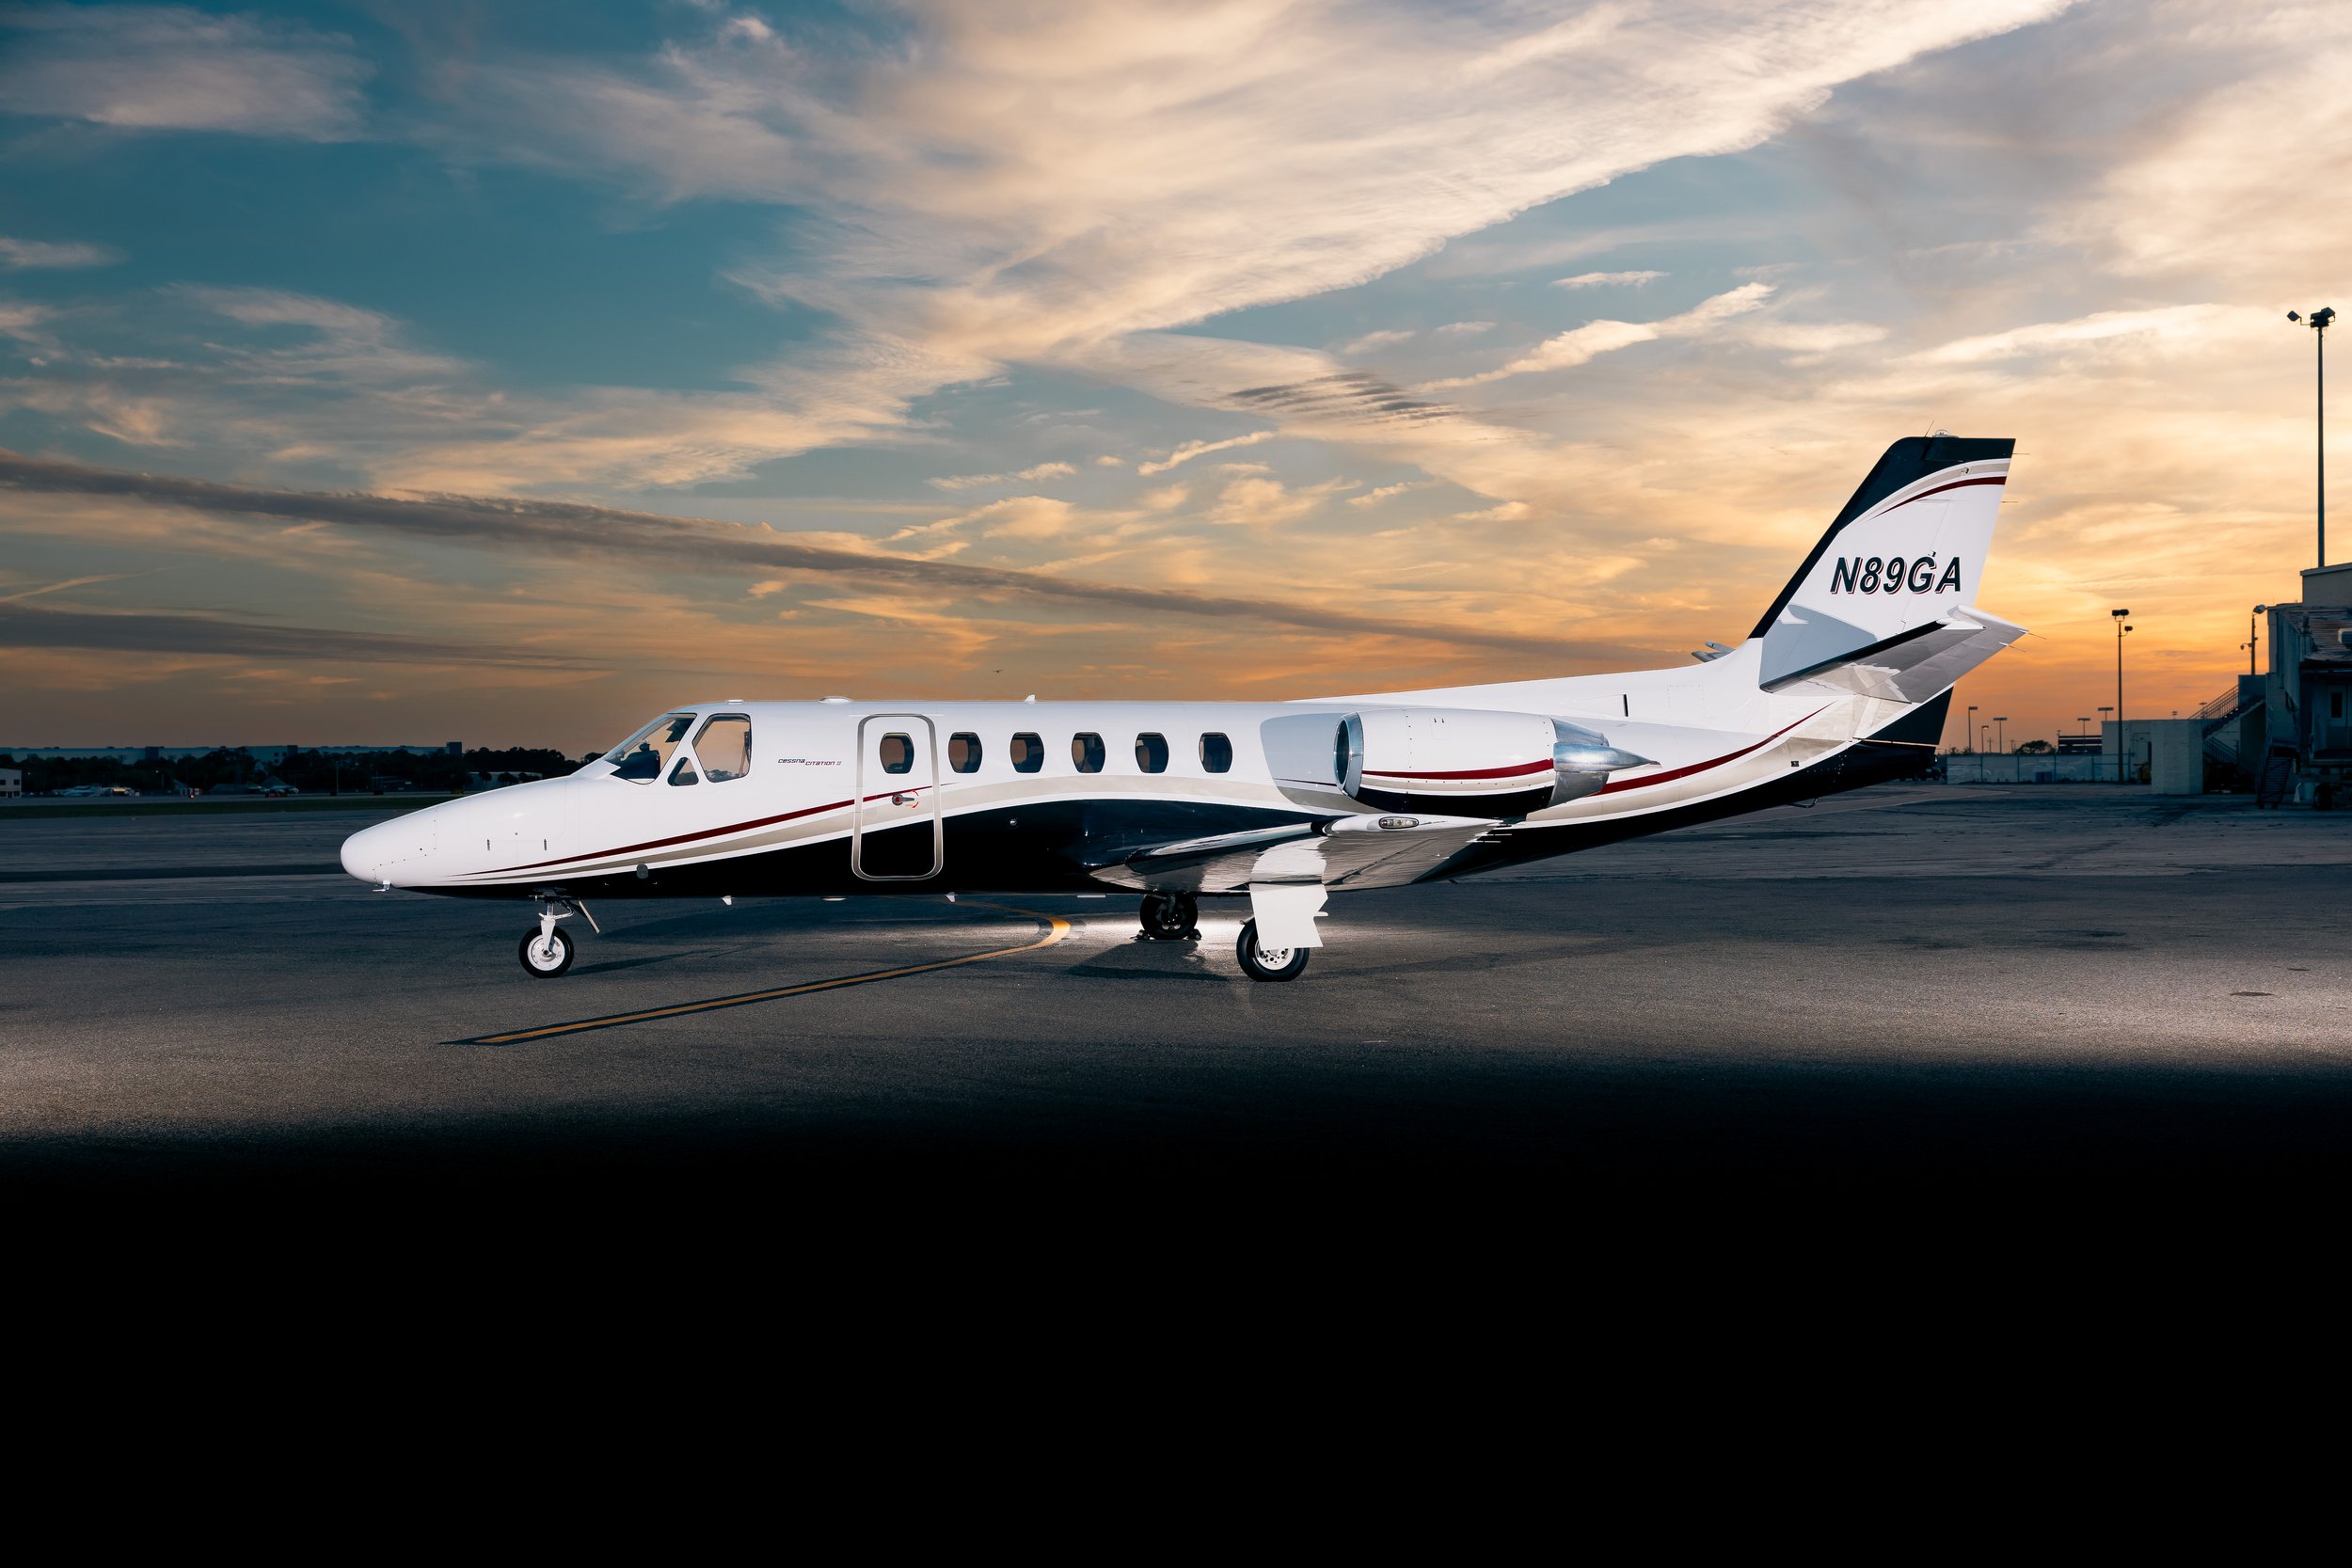 1980 Cessna Citation II Private Jet For Sale (N89GA) From AKC Aviation On AvPay aircraft exterior left side